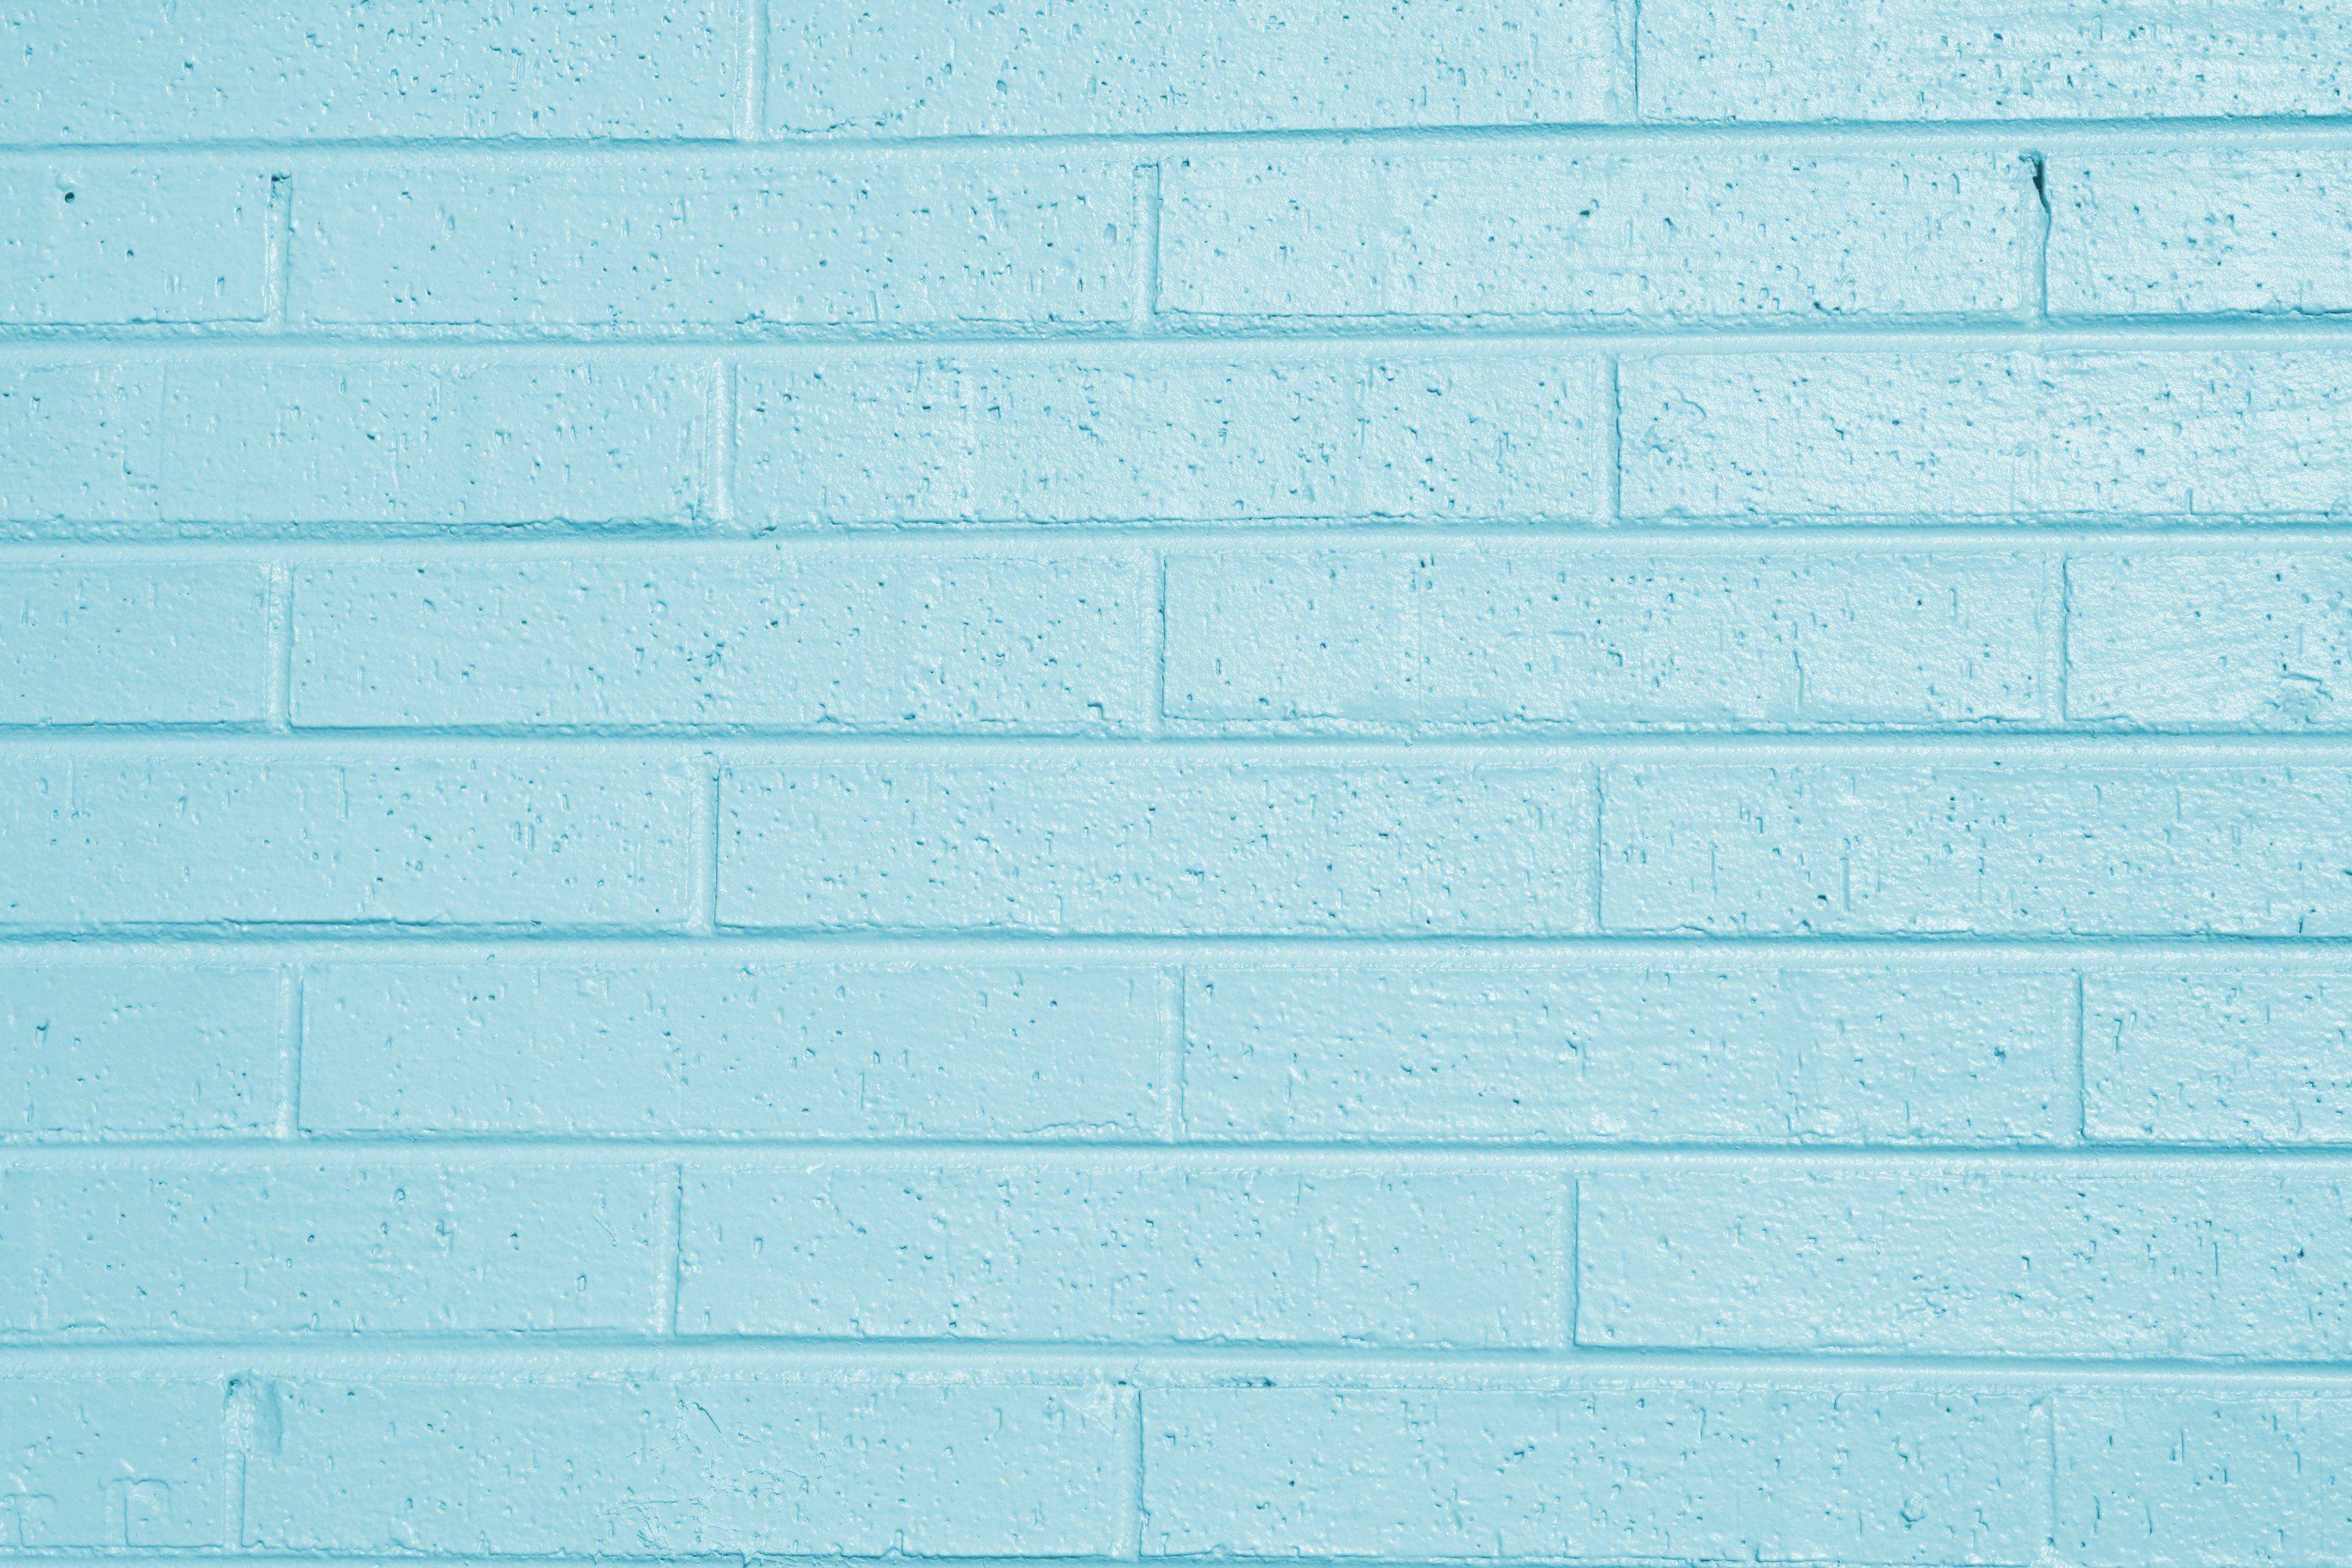 Teal Blue Painted Brick Wall Texture Picture. Free Photograph